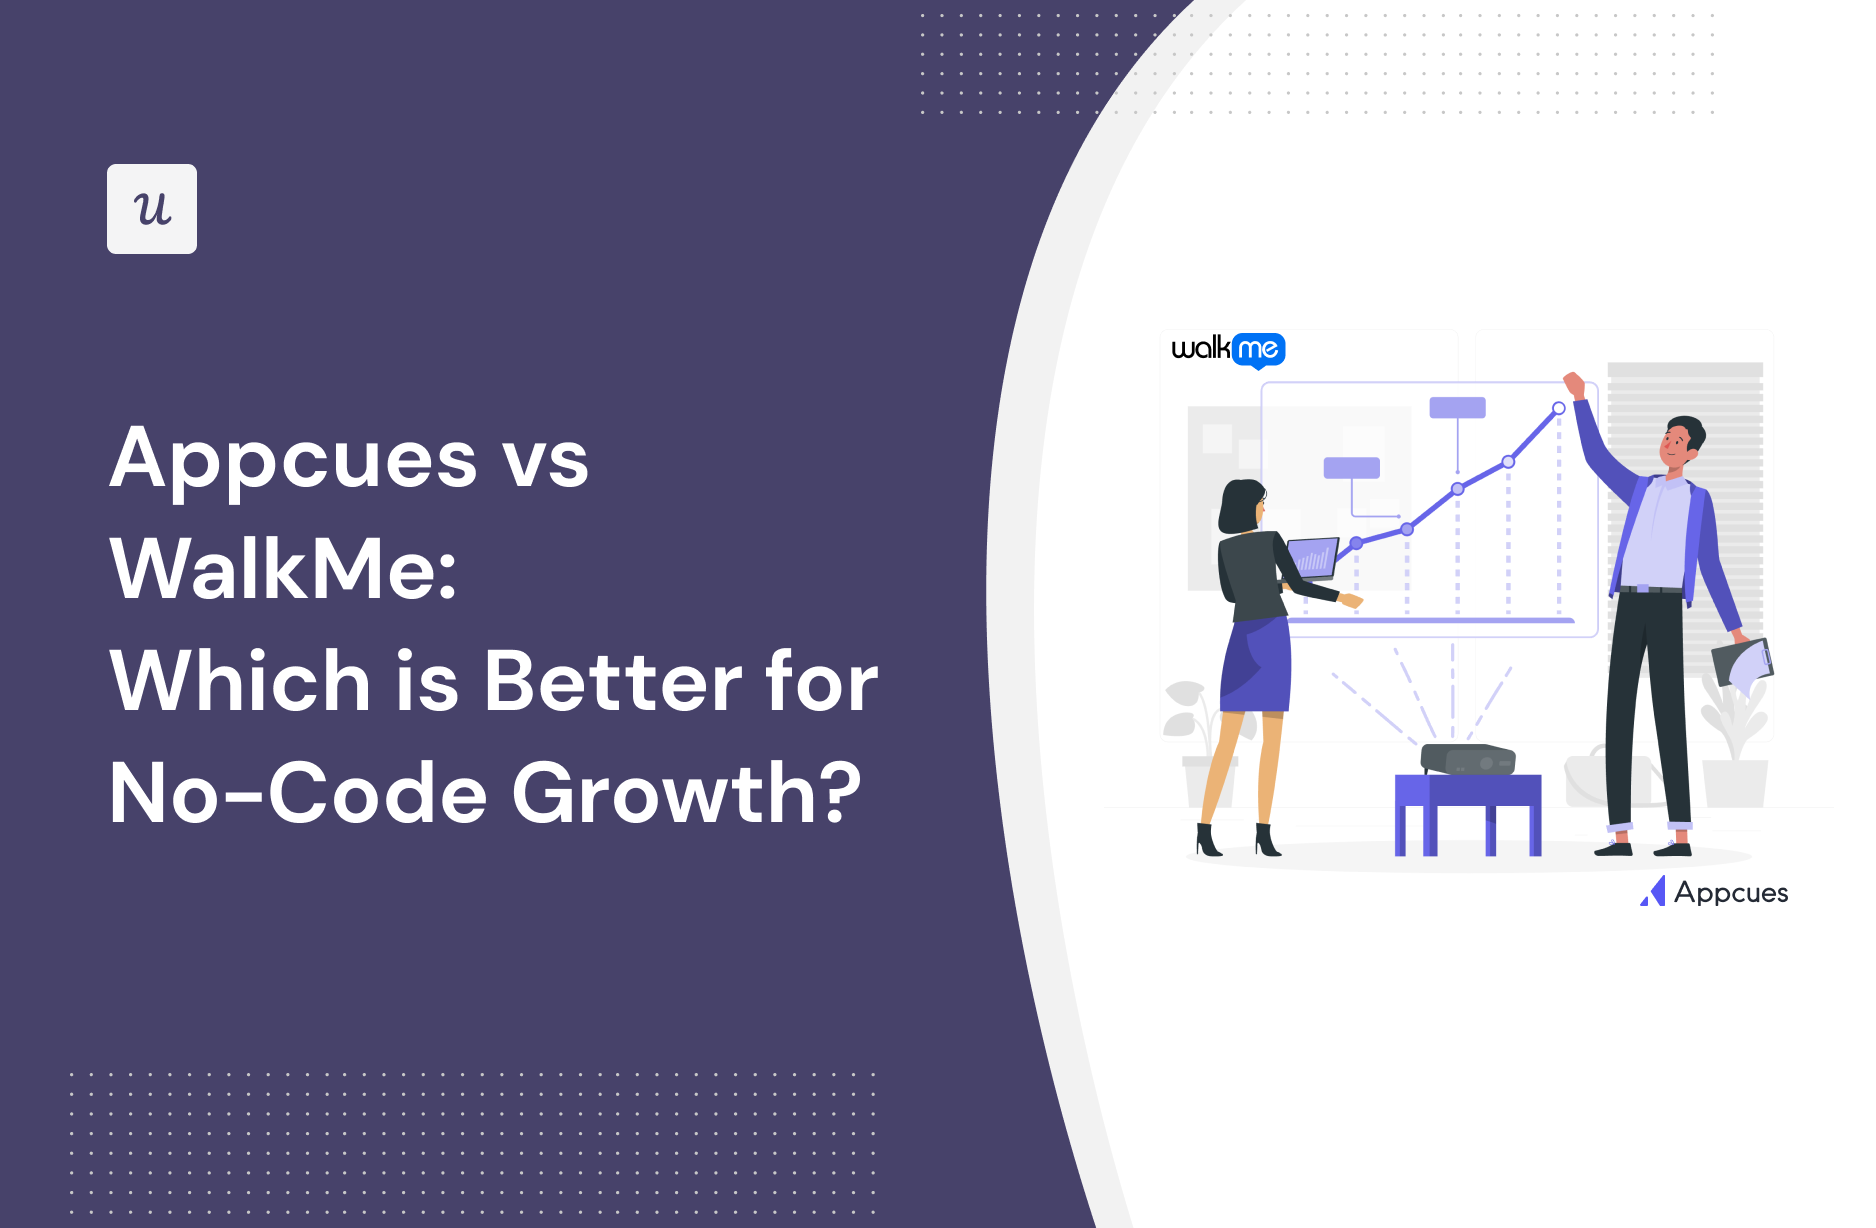 Appcues vs WalkMe: Which is Better for No-Code Growth?